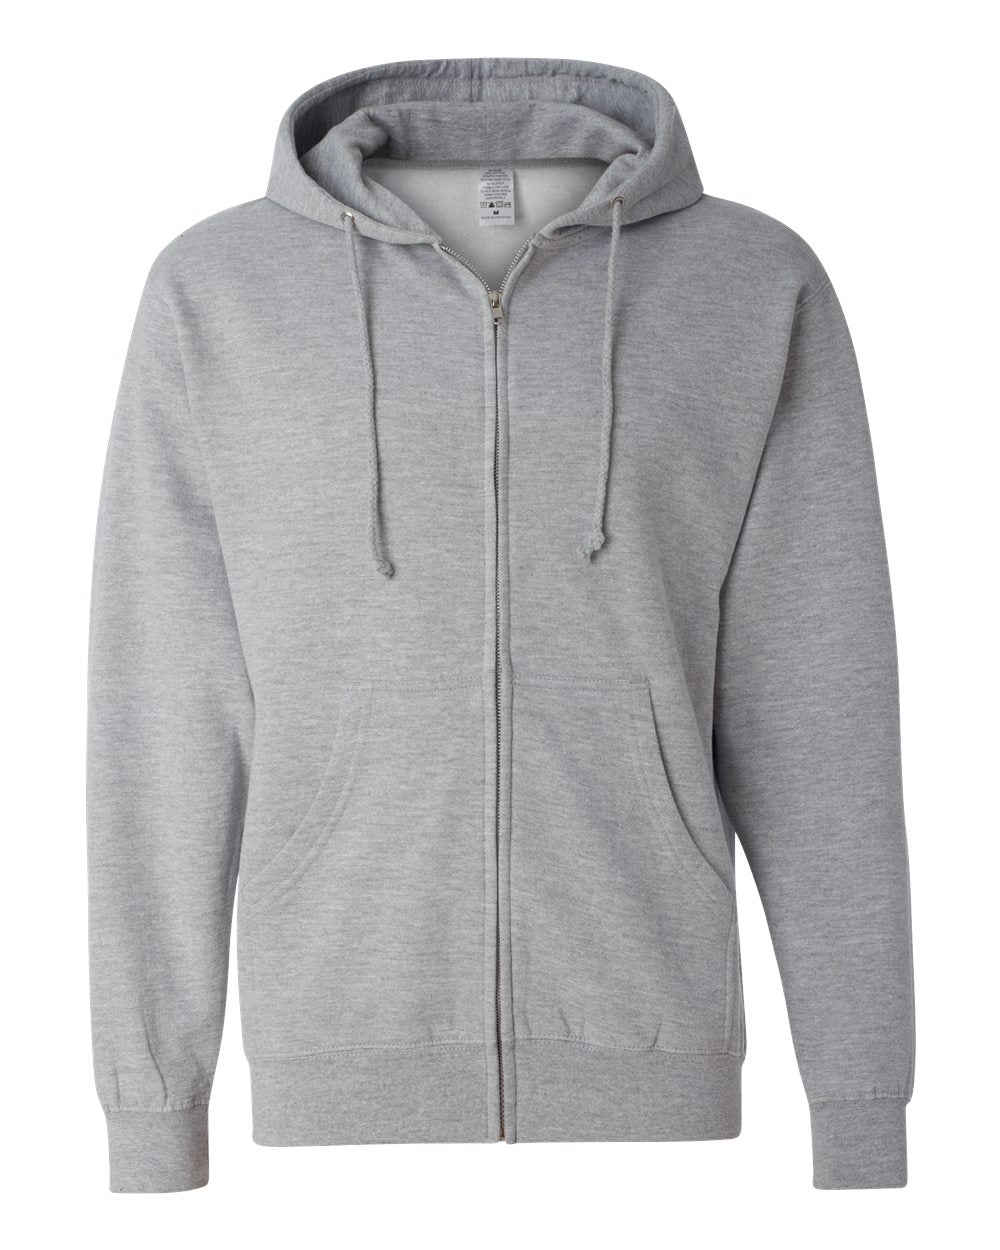 Independent Trading Co. - Midweight Full-Zip Hooded Sweatshirt - SS4500Z